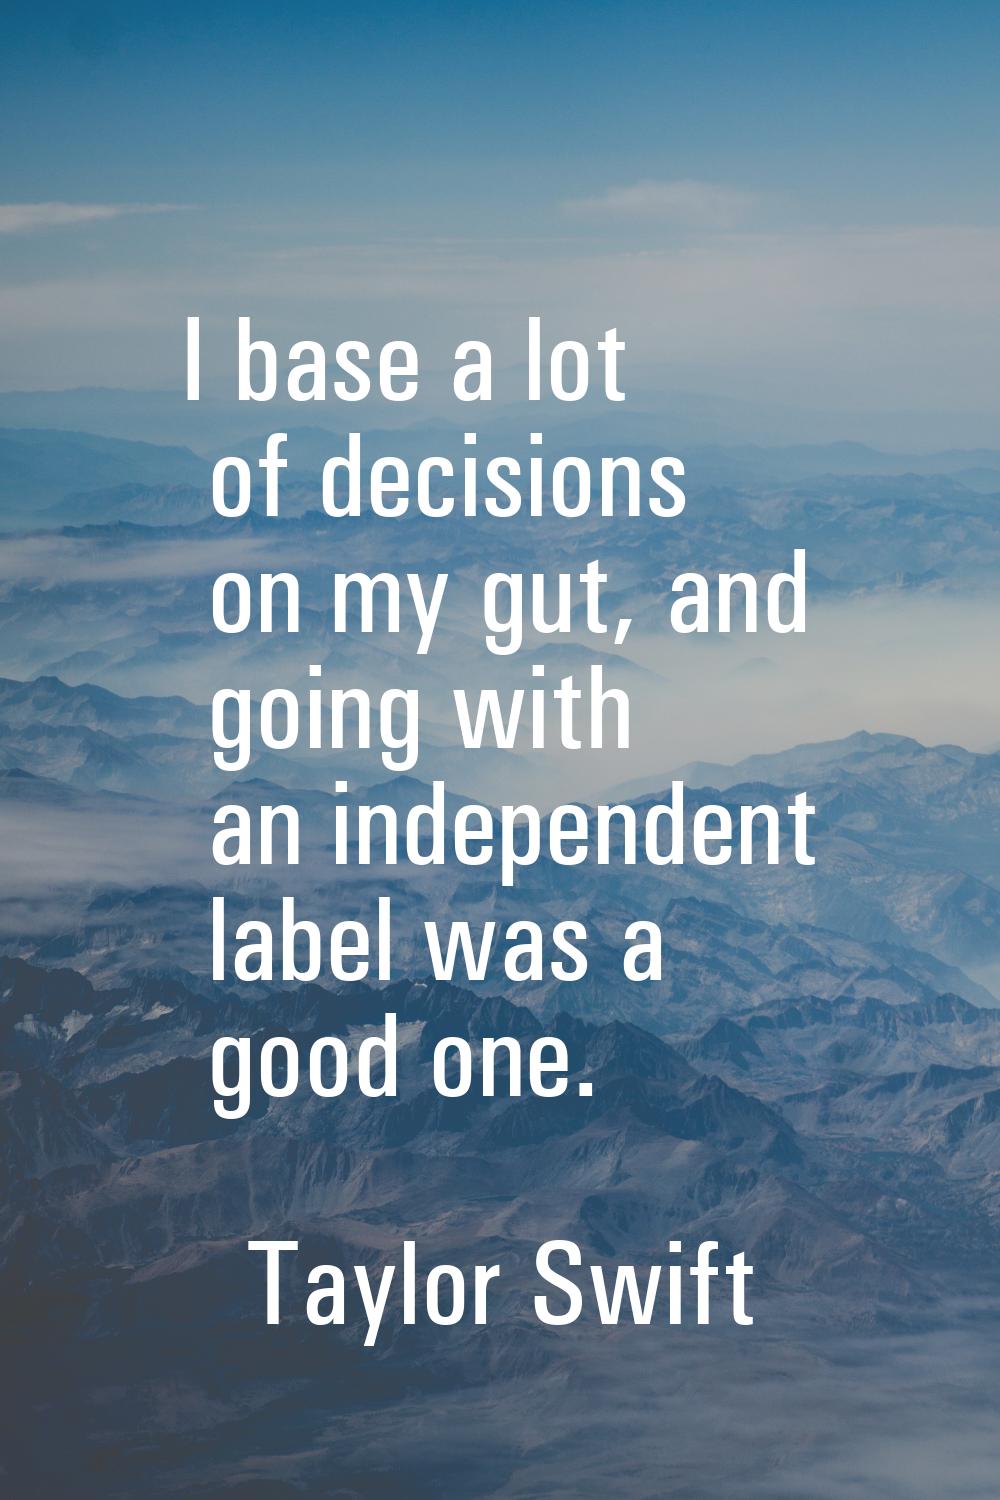 I base a lot of decisions on my gut, and going with an independent label was a good one.